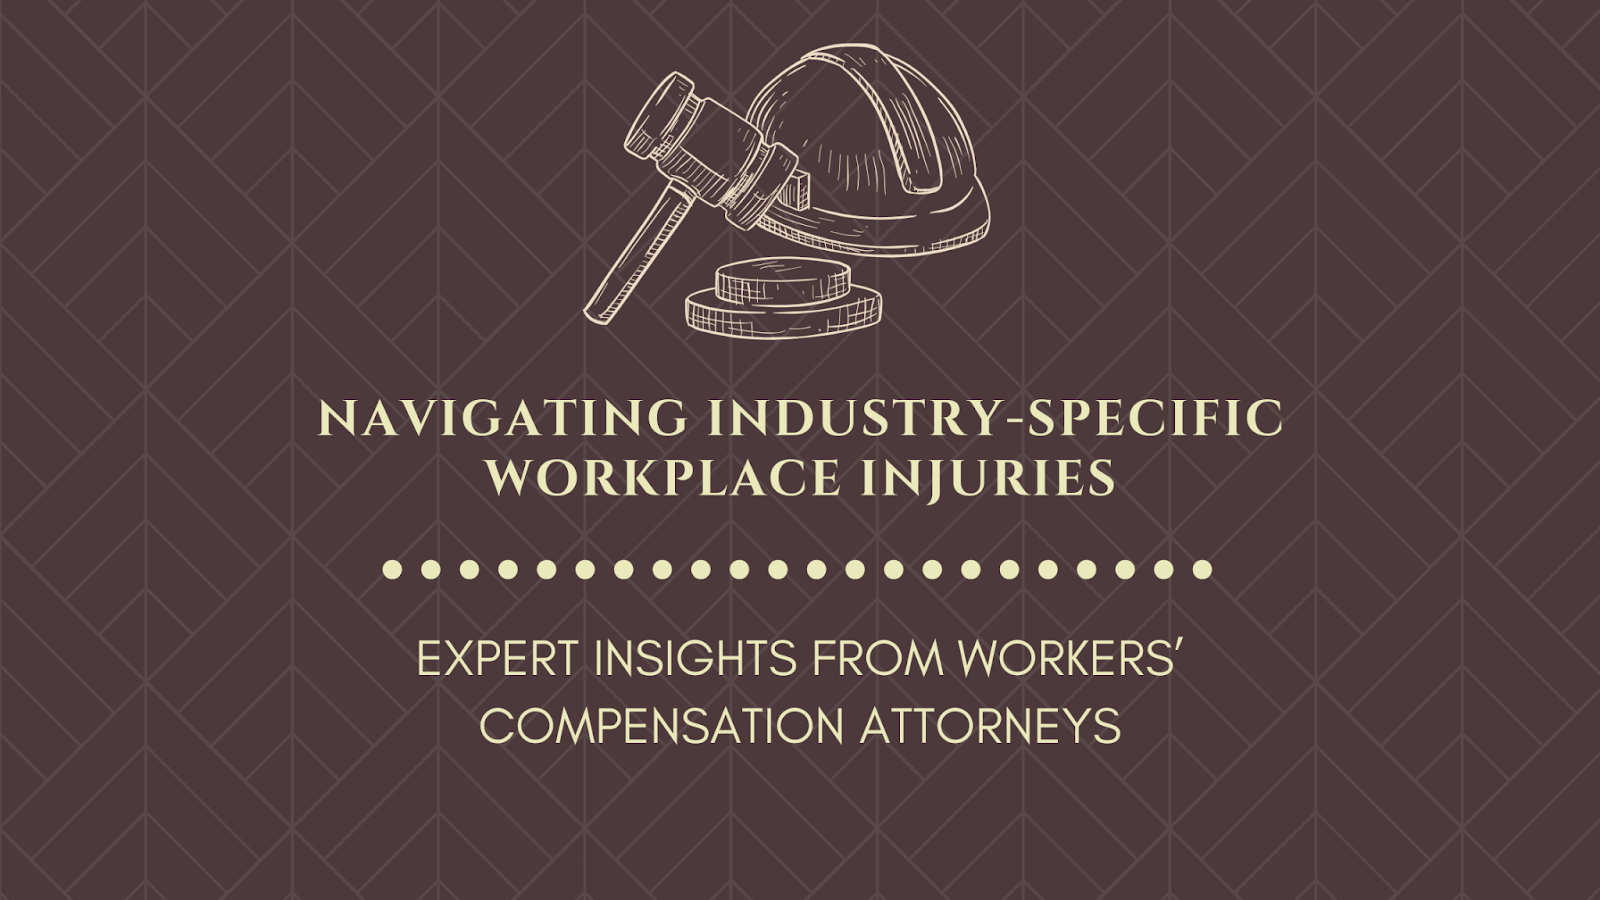 Navigating Industry-Specific Workplace Injuries: Expert Insights from Workers’ Compensation Attorneys